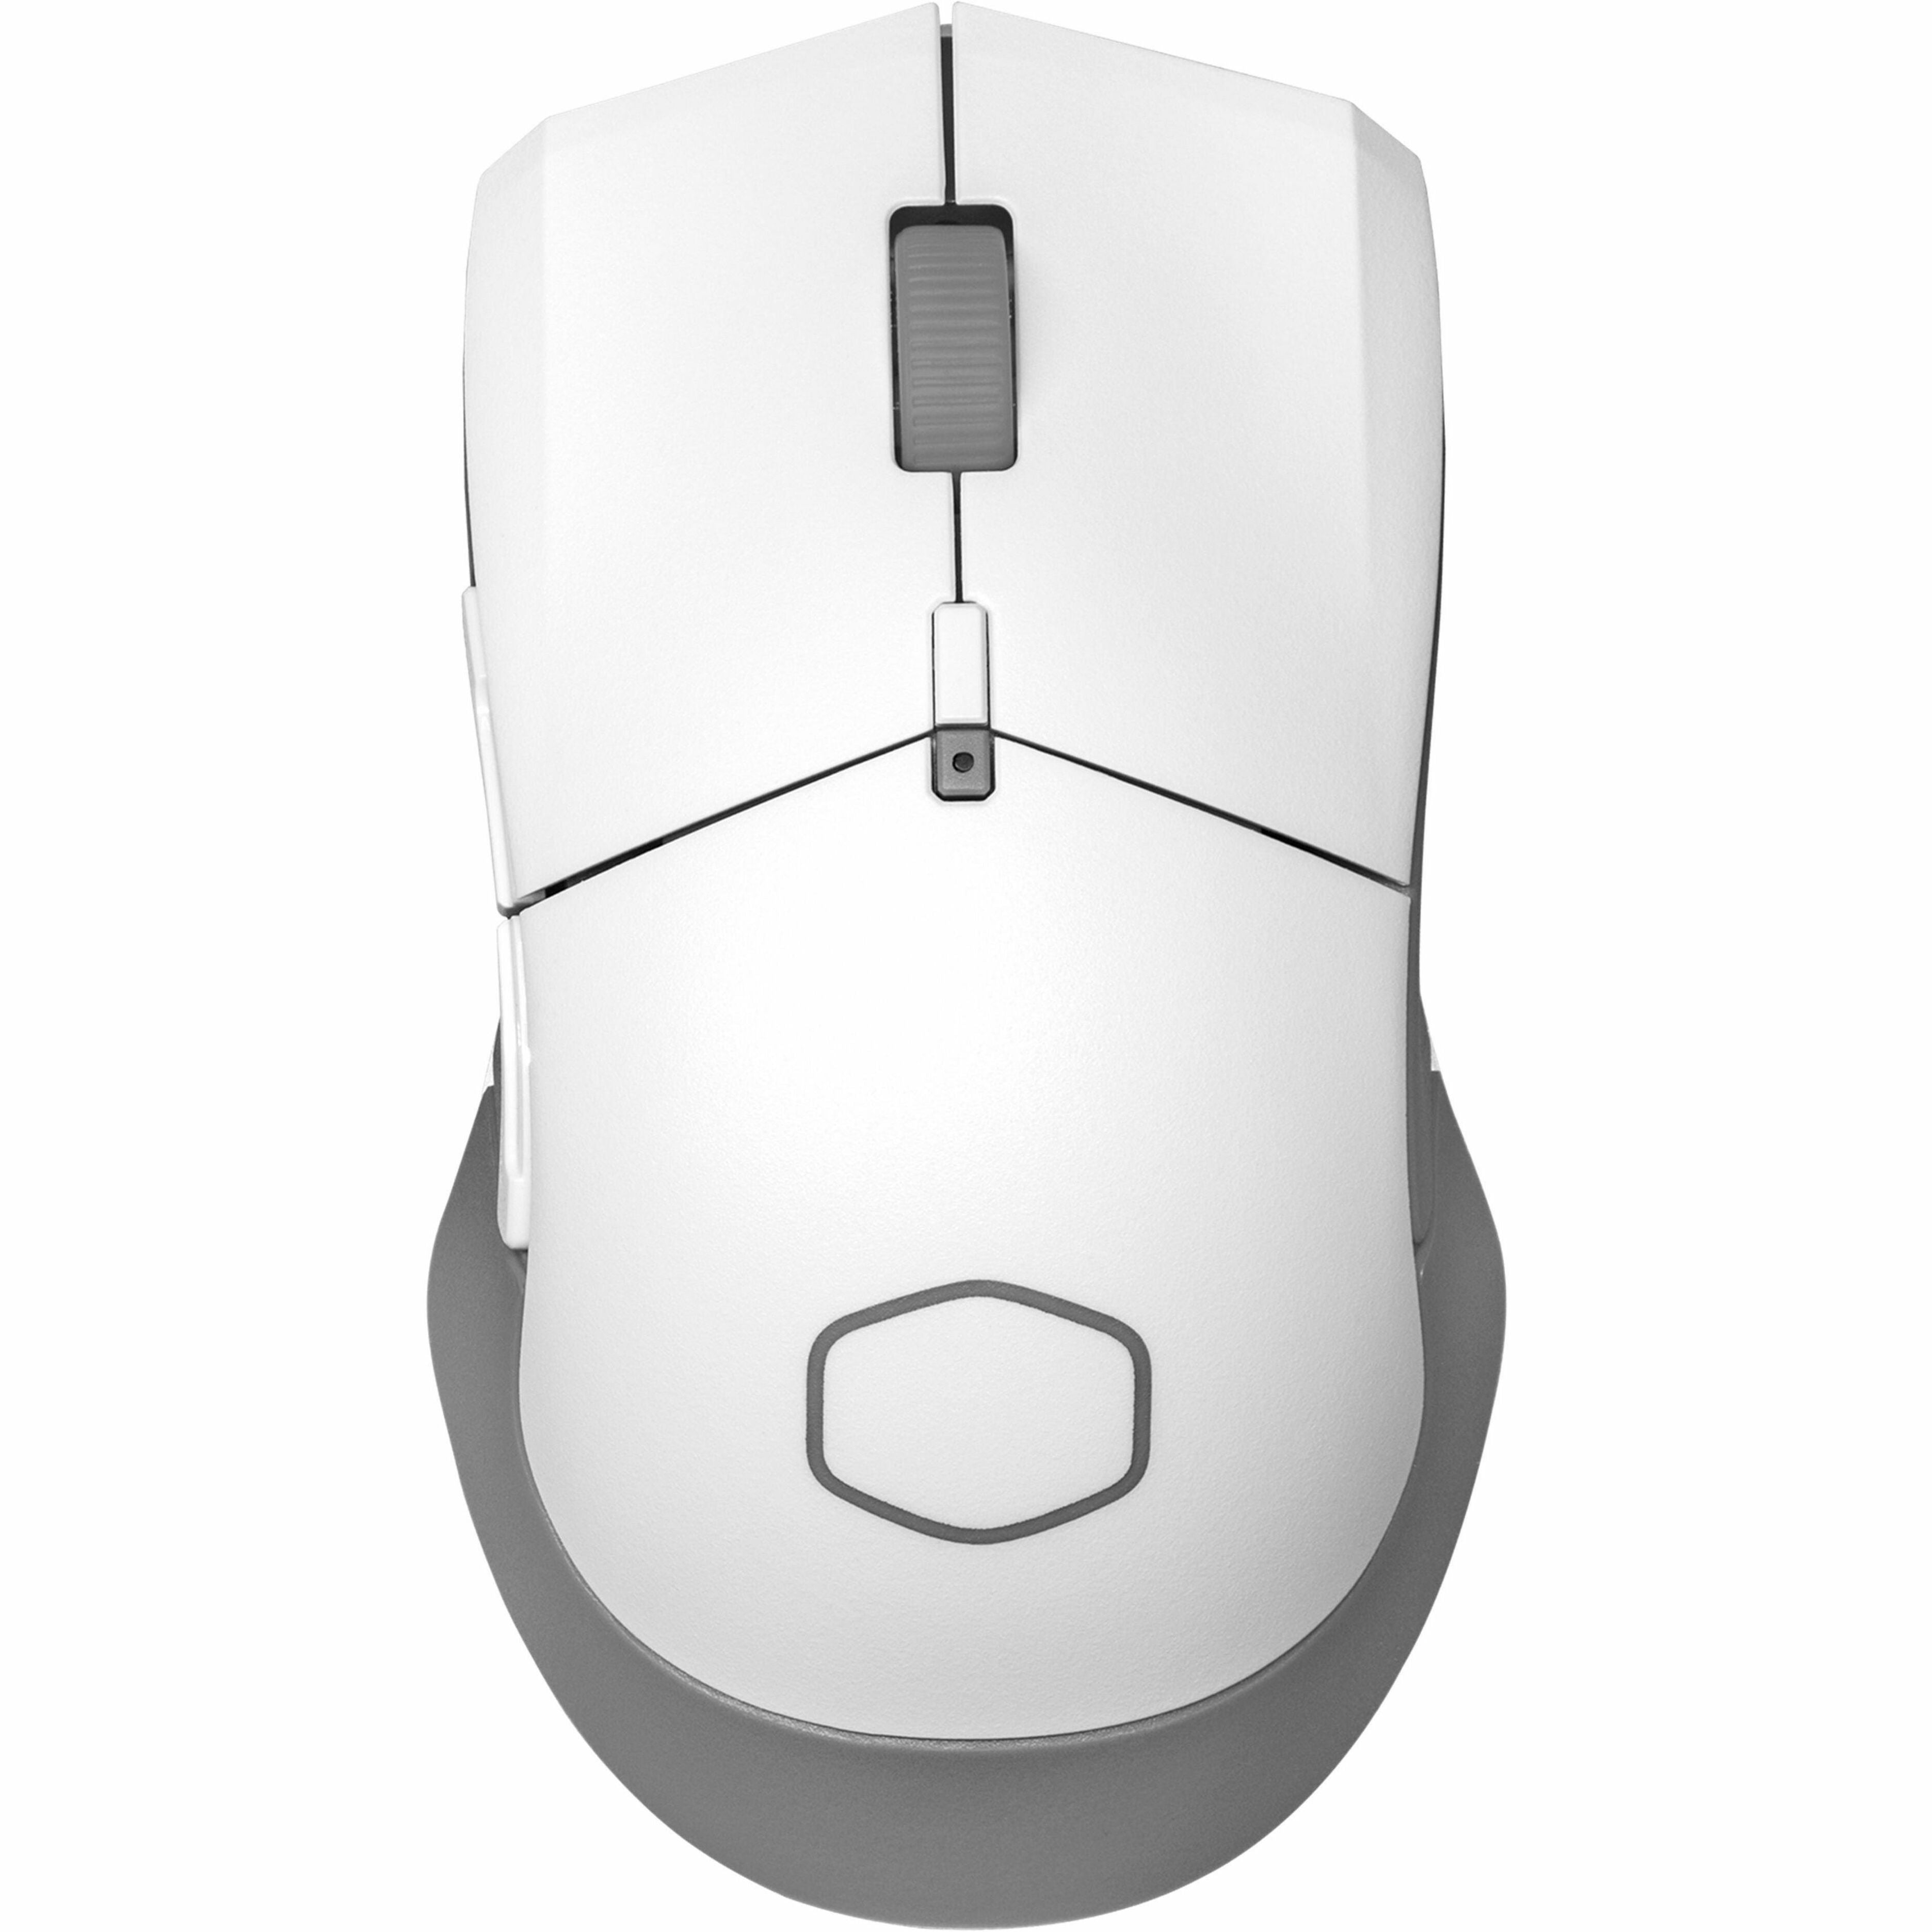 Cooler Master MM-311-WWOW1 MM311 Gaming Mouse, Symmetrical Design, 10000 DPI, Wireless Connectivity